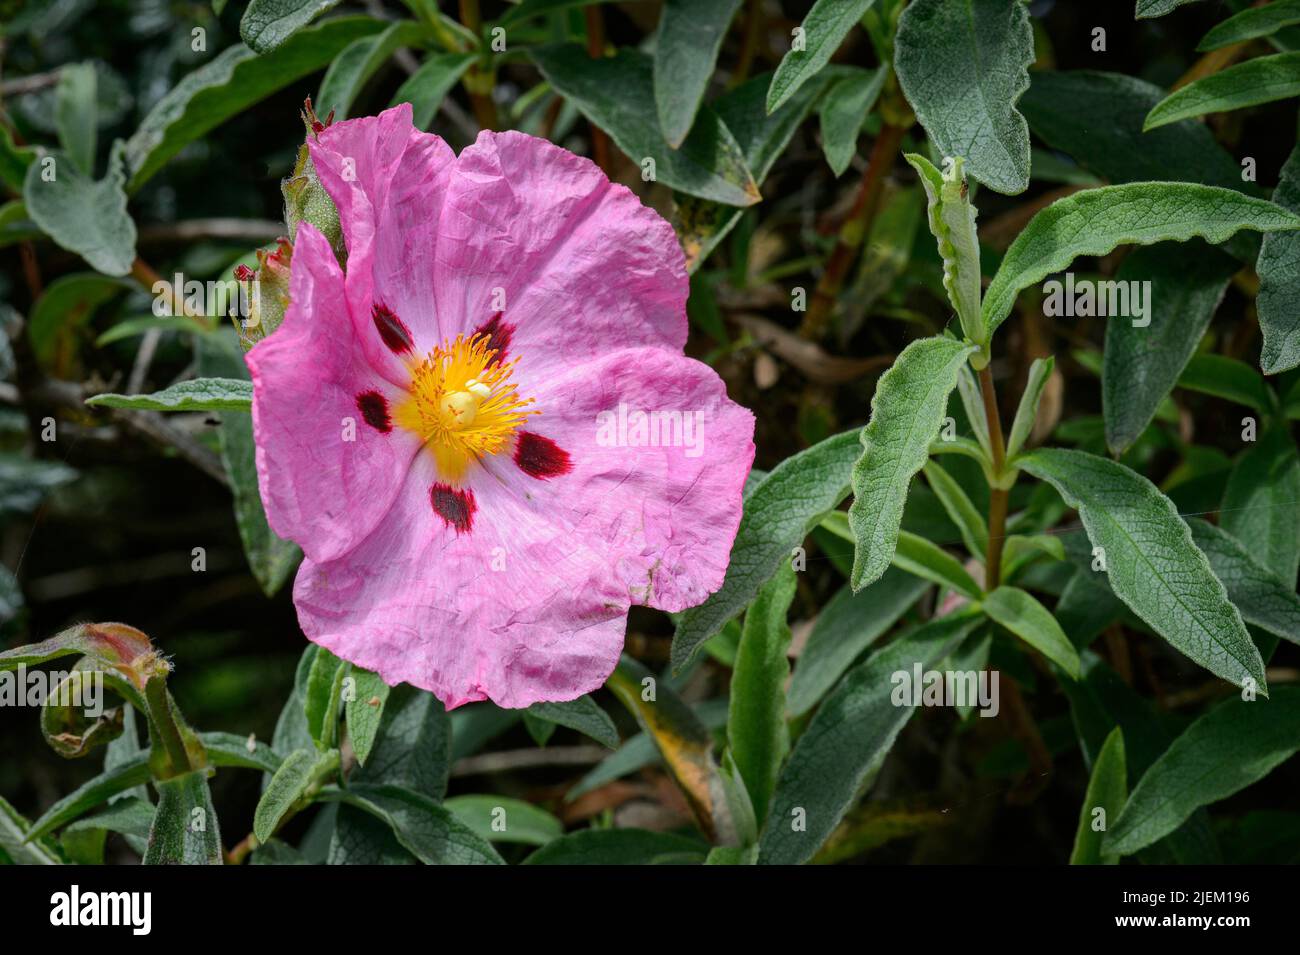 Light corollas, in crumpled bright pink silk, with A heart bristling with golden yellow stamens. Stock Photo